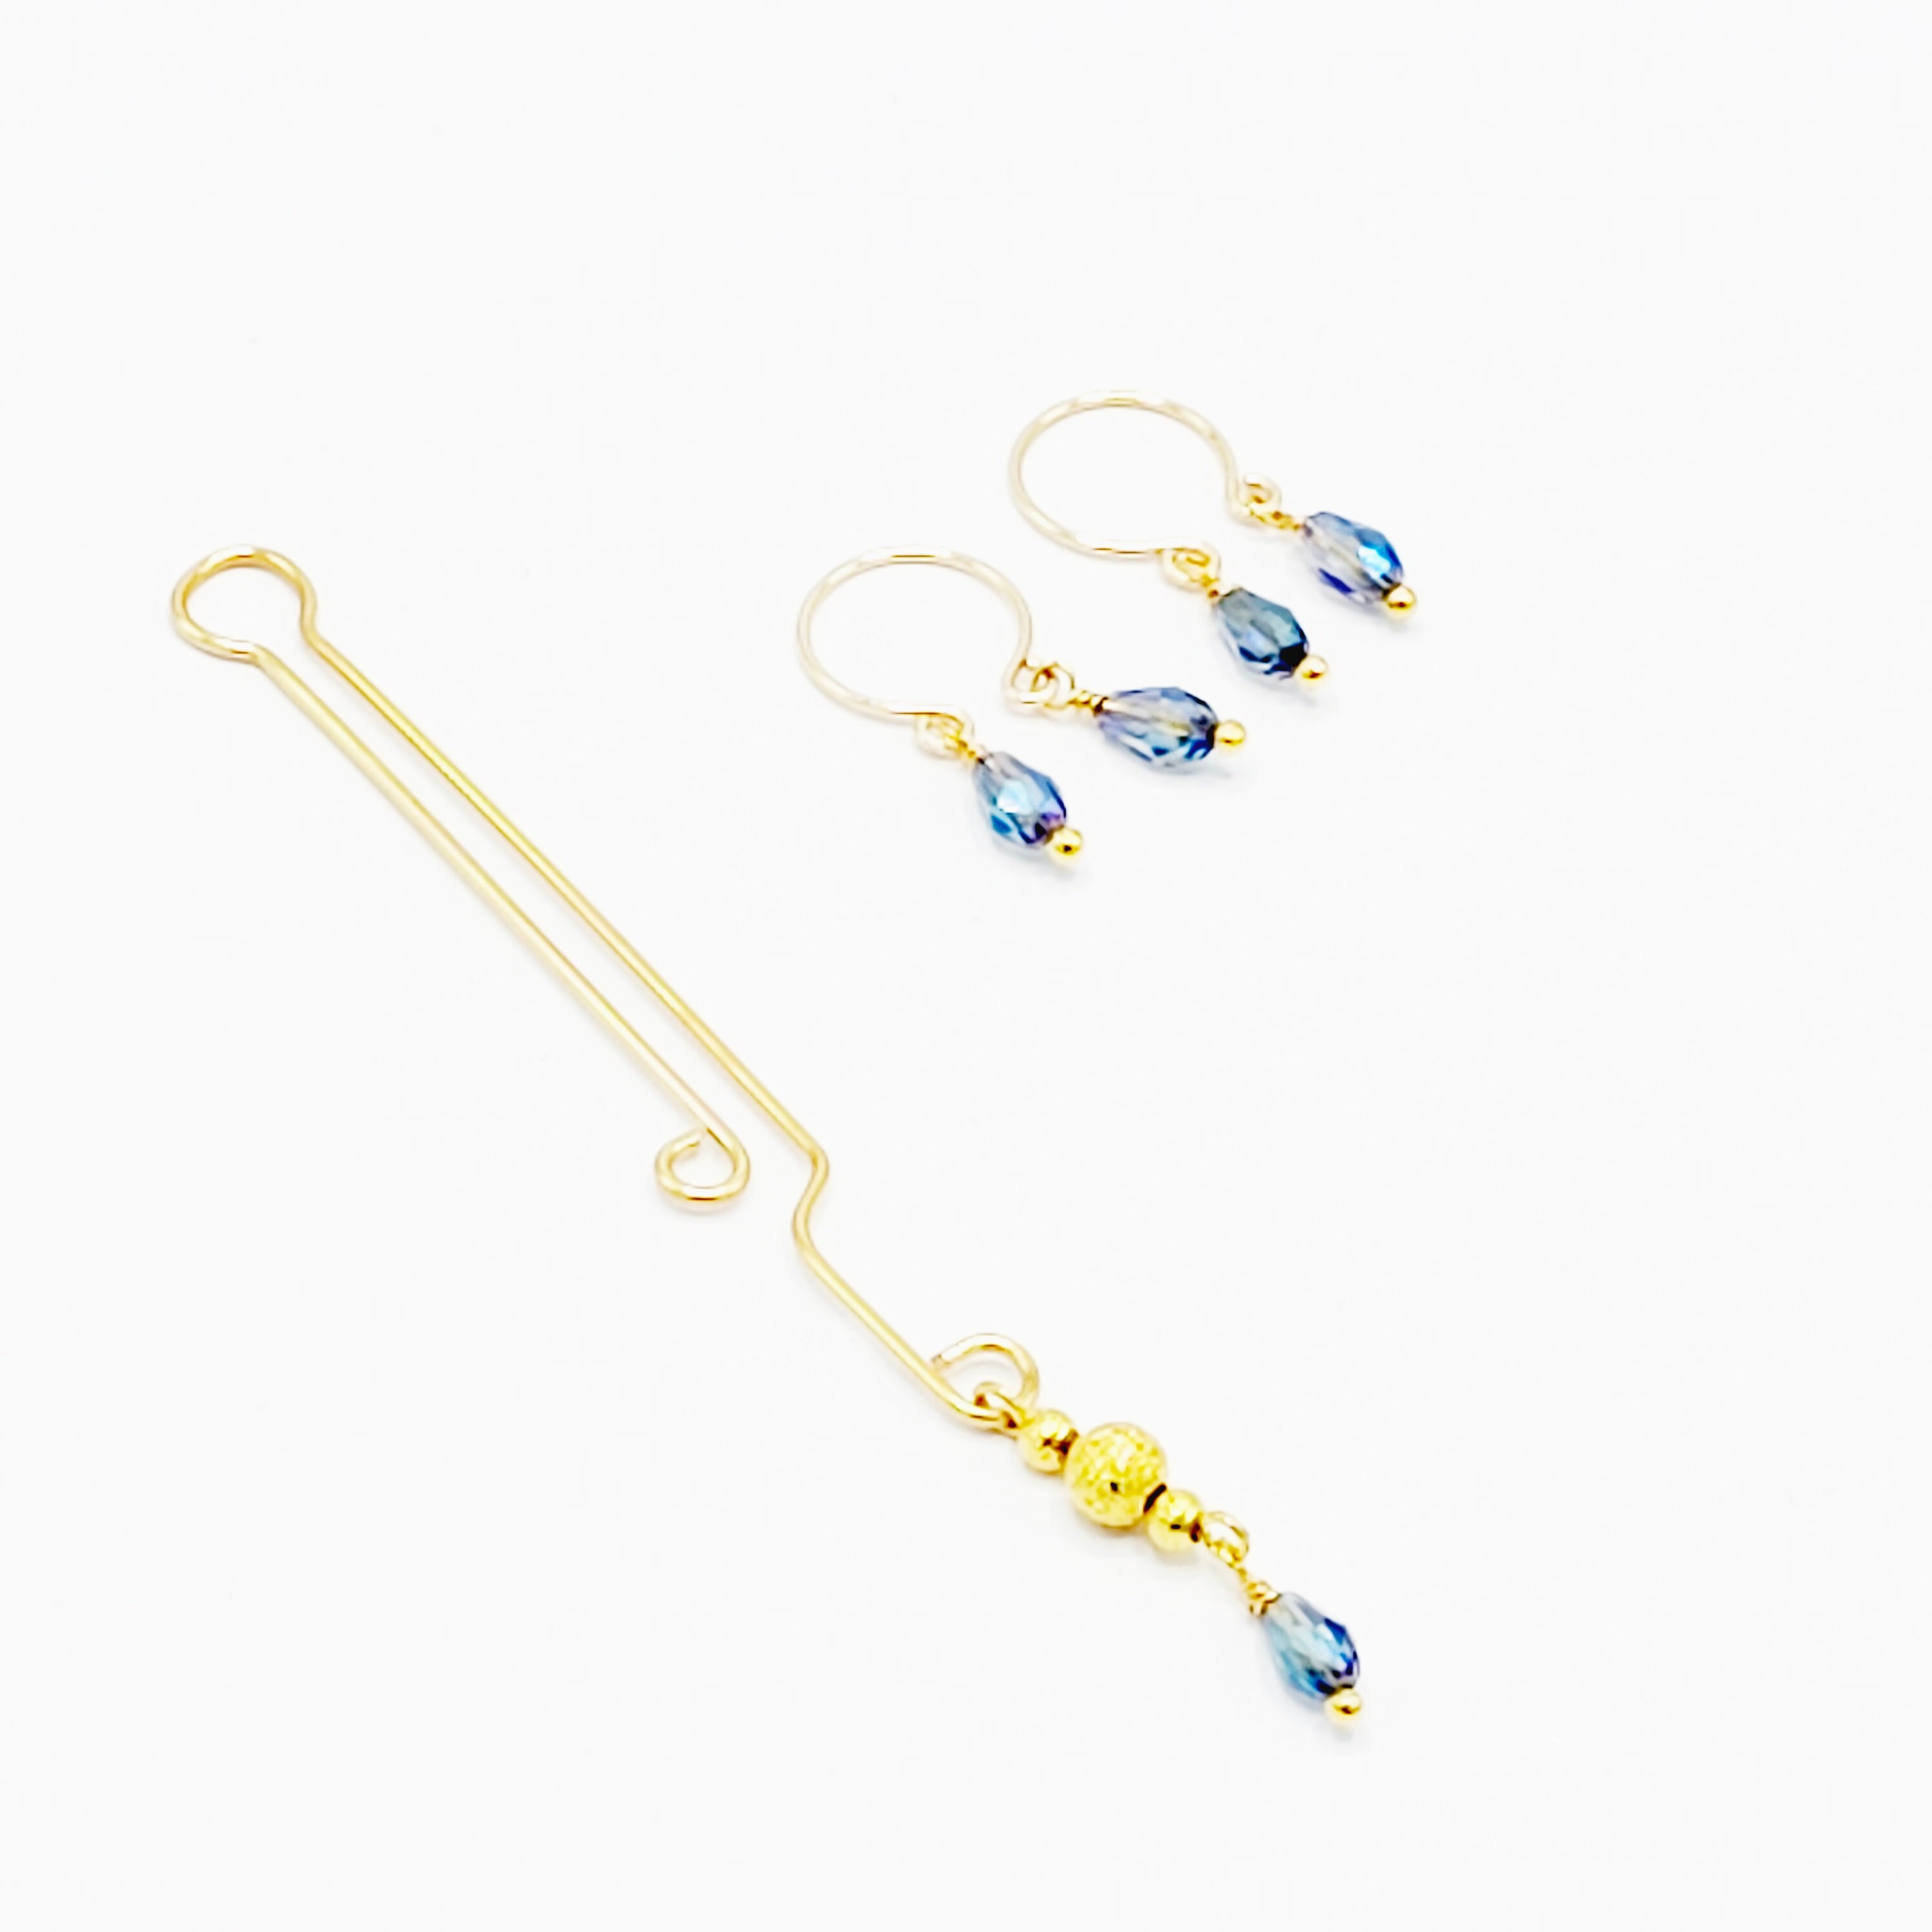 Non Piercing Nipple and Clitoral Jewelry Set. Gold and Blue Crystal Nipple Ring Dangles and Labia Clip for BDSM Submissive. MATURE photo